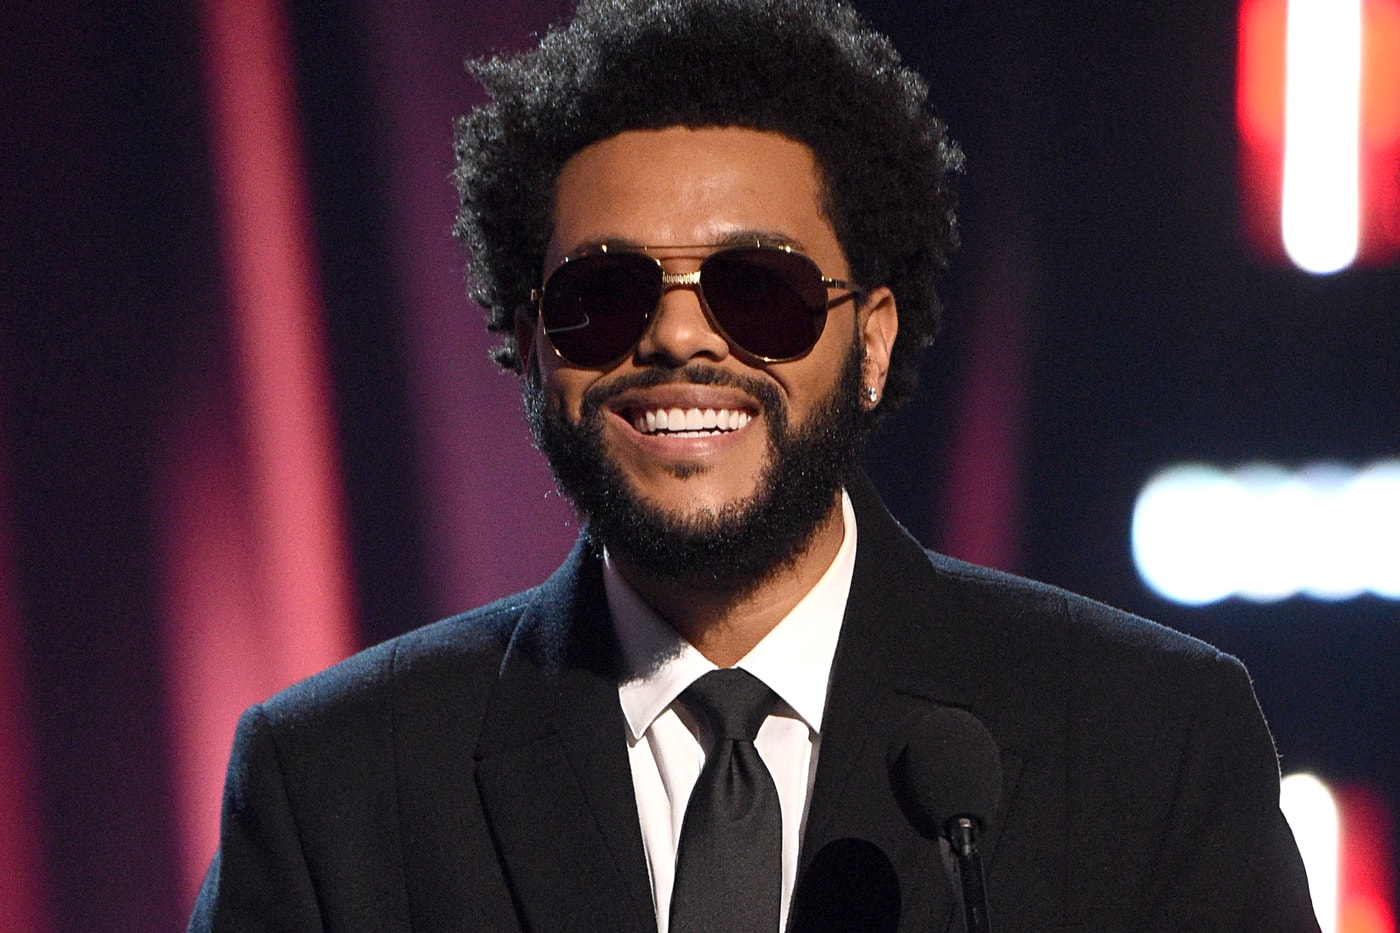 The Weeknd Teases involvement new song Avatar The Way of Water soundtrack